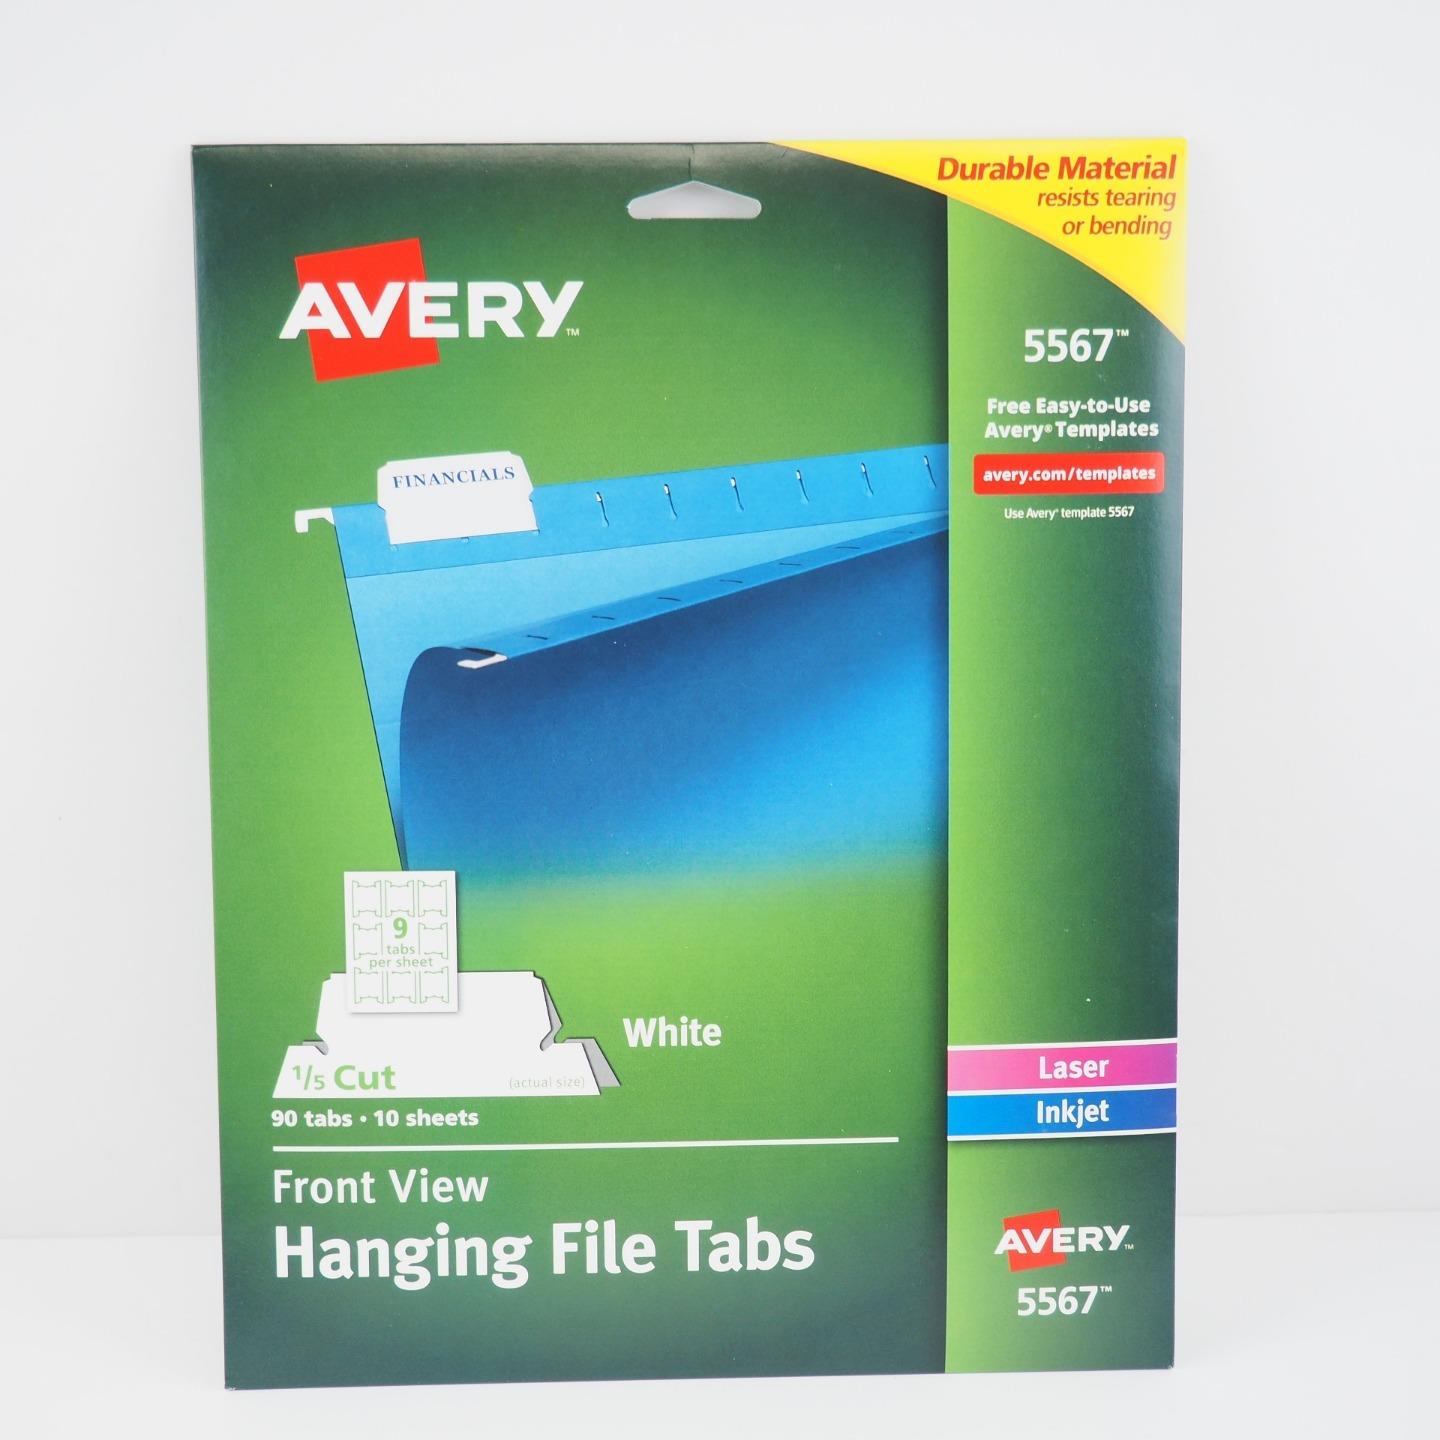 avery-5567-front-view-hanging-file-tabs-90-pcs-10-sheets-new-ebay